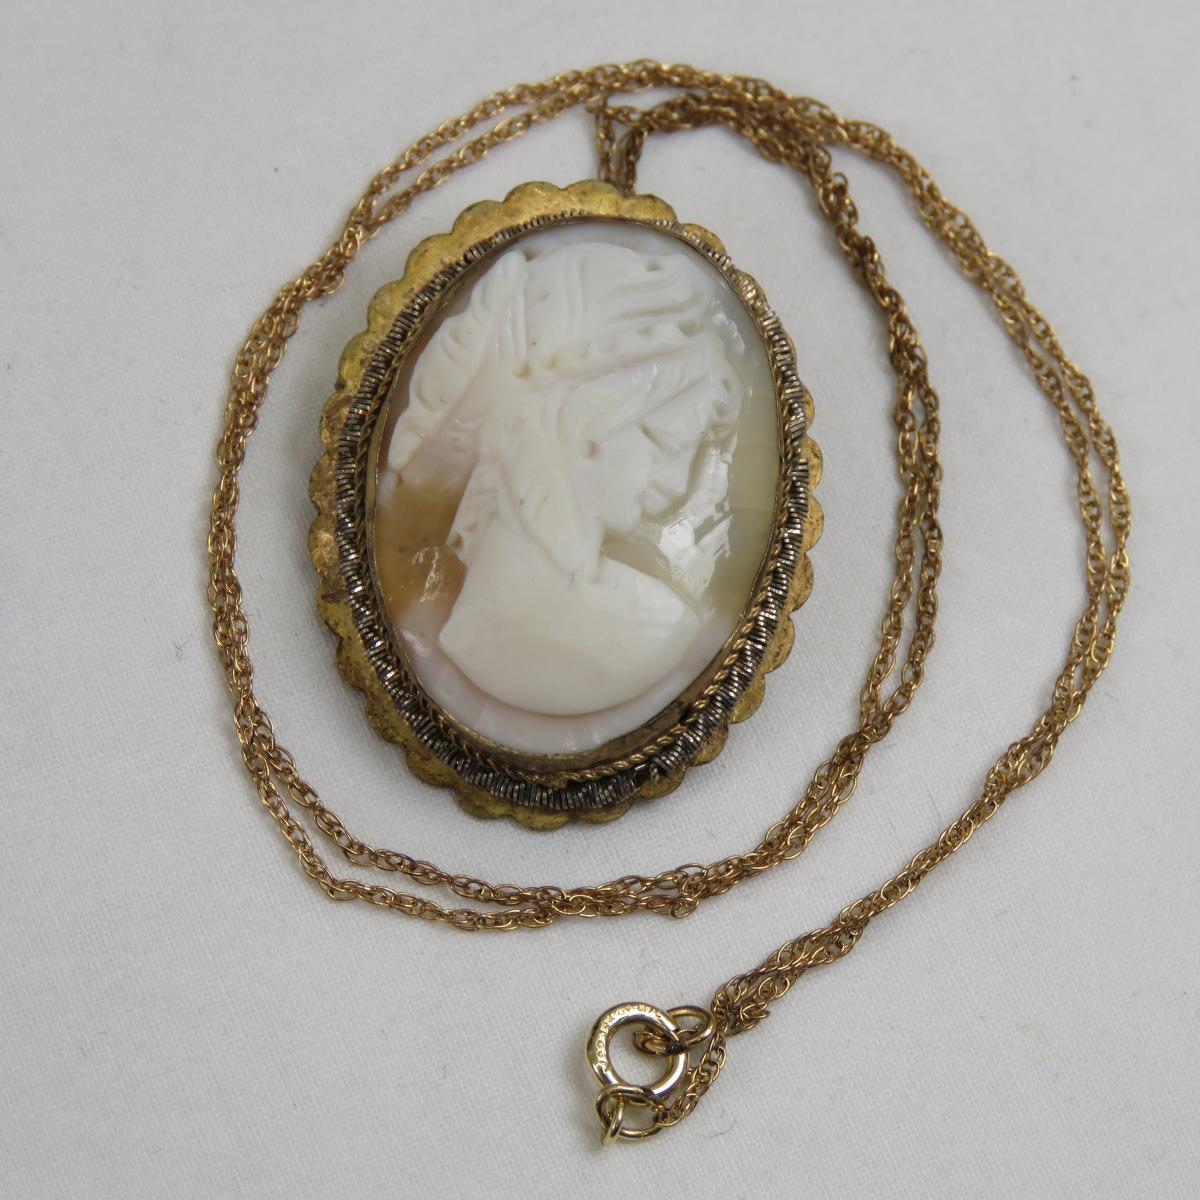 4 Gold Filled Cameo Brooch Pendants with Chains